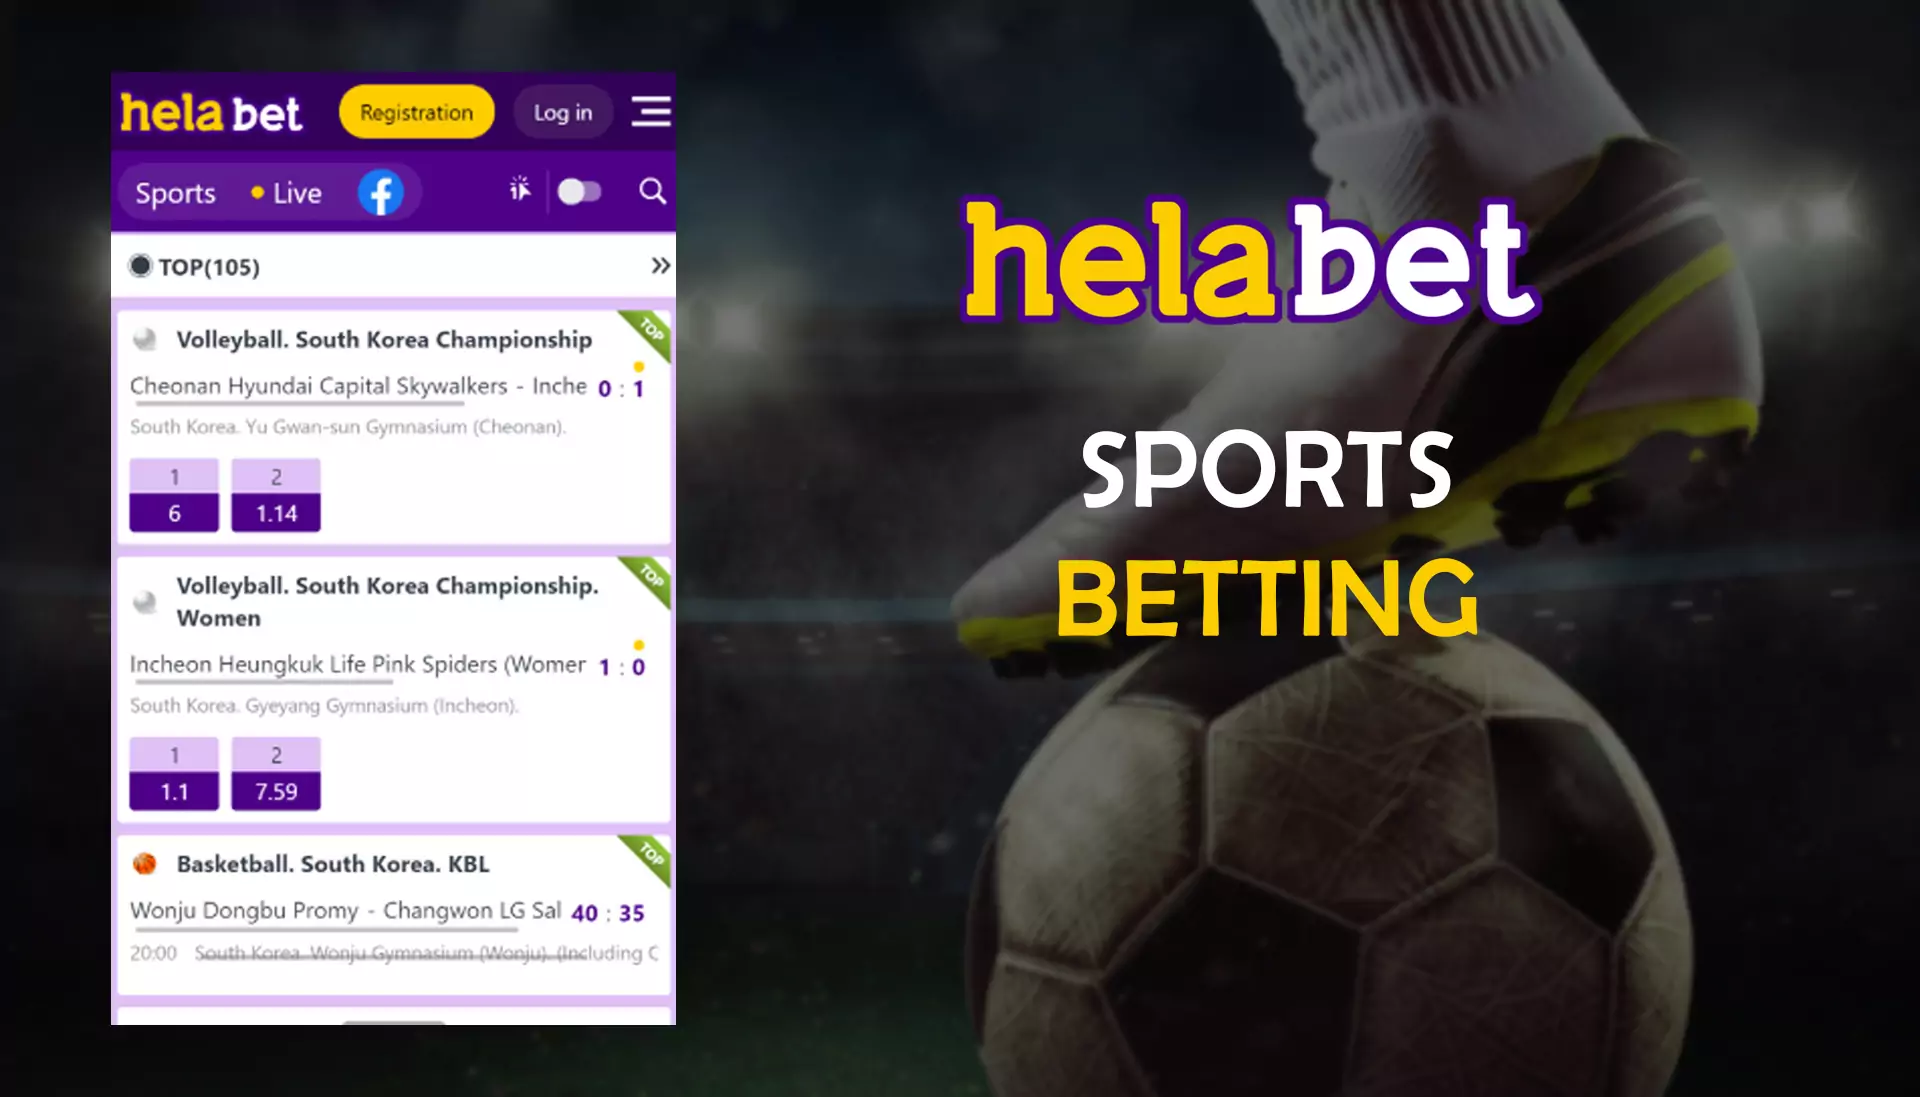 Users from India can bet on various sports at Helabet.